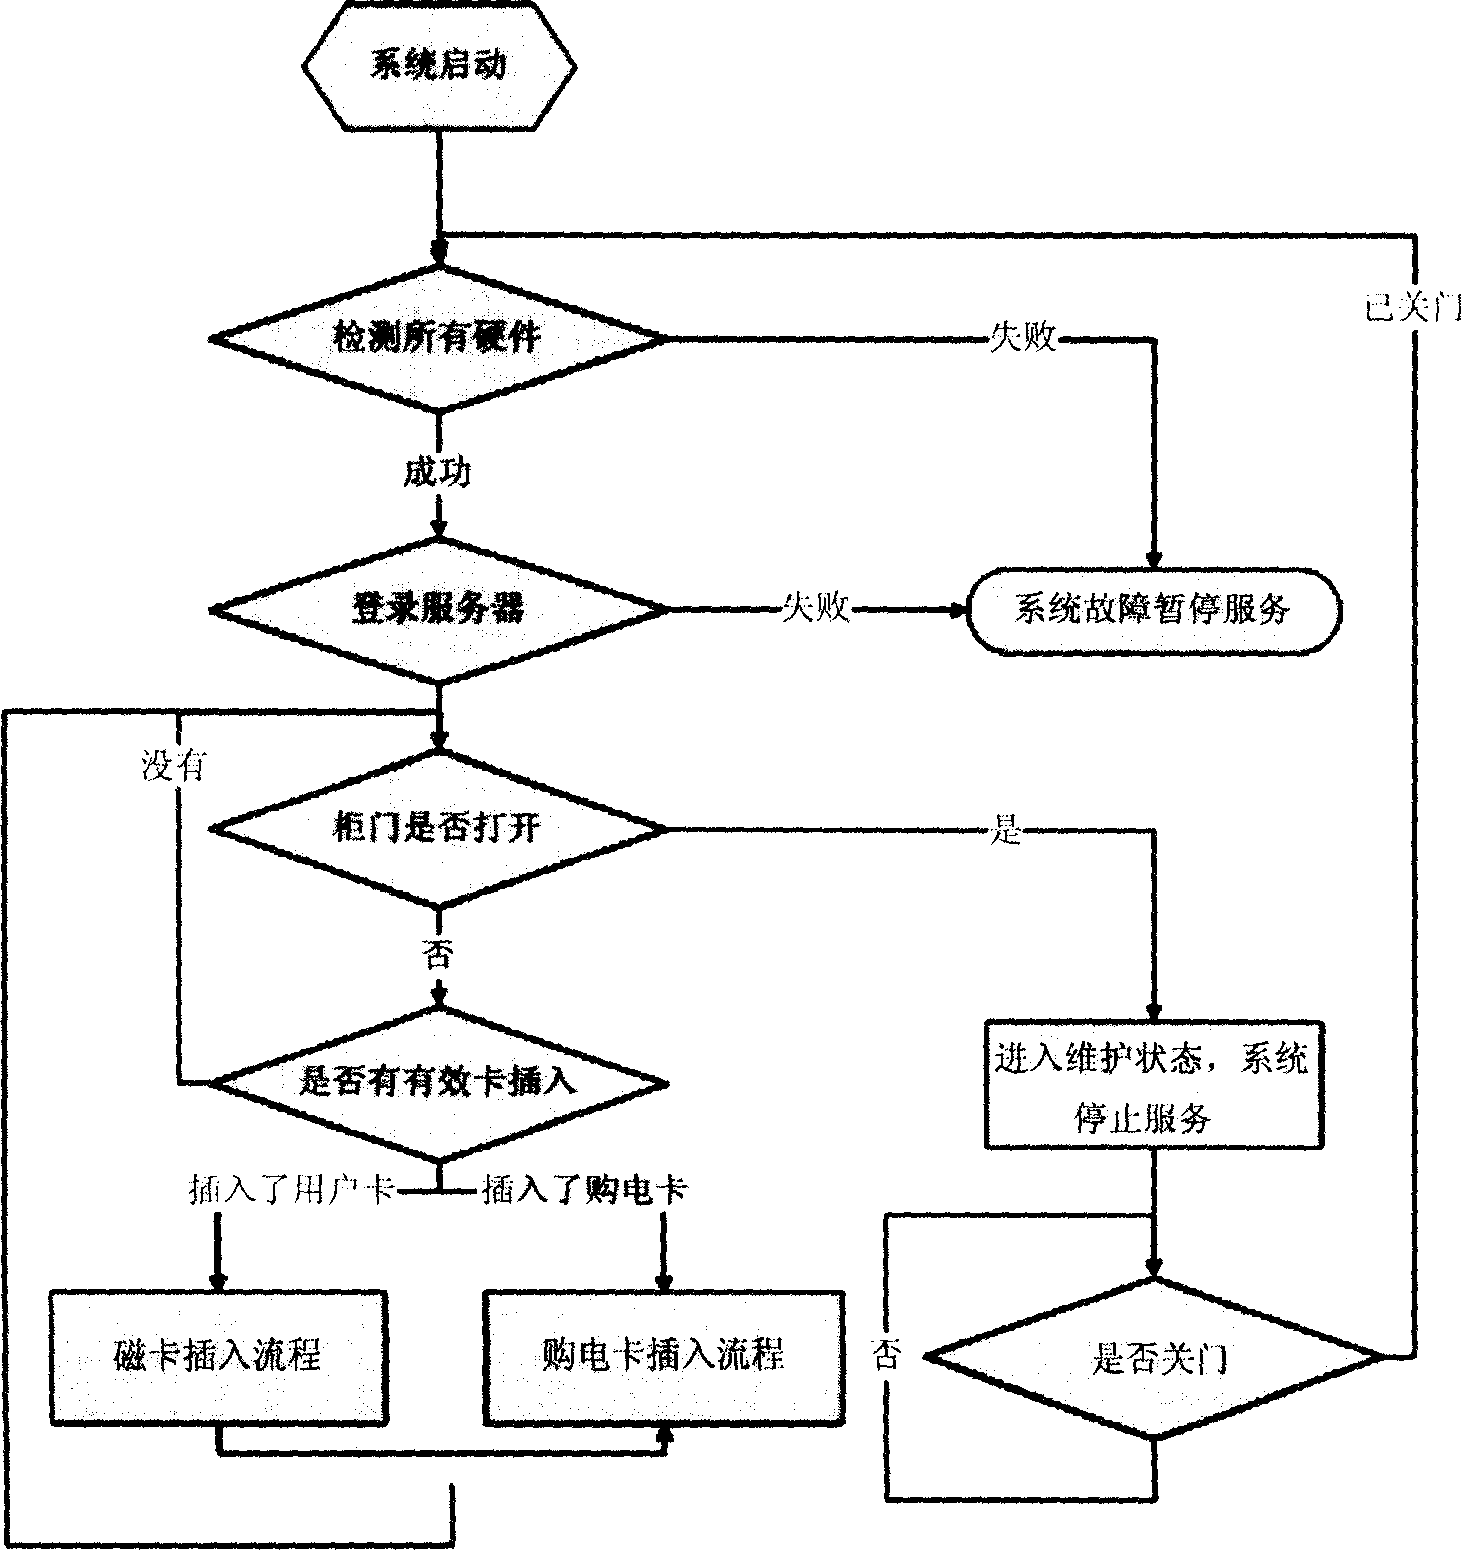 Self-service charging and electricity buying system